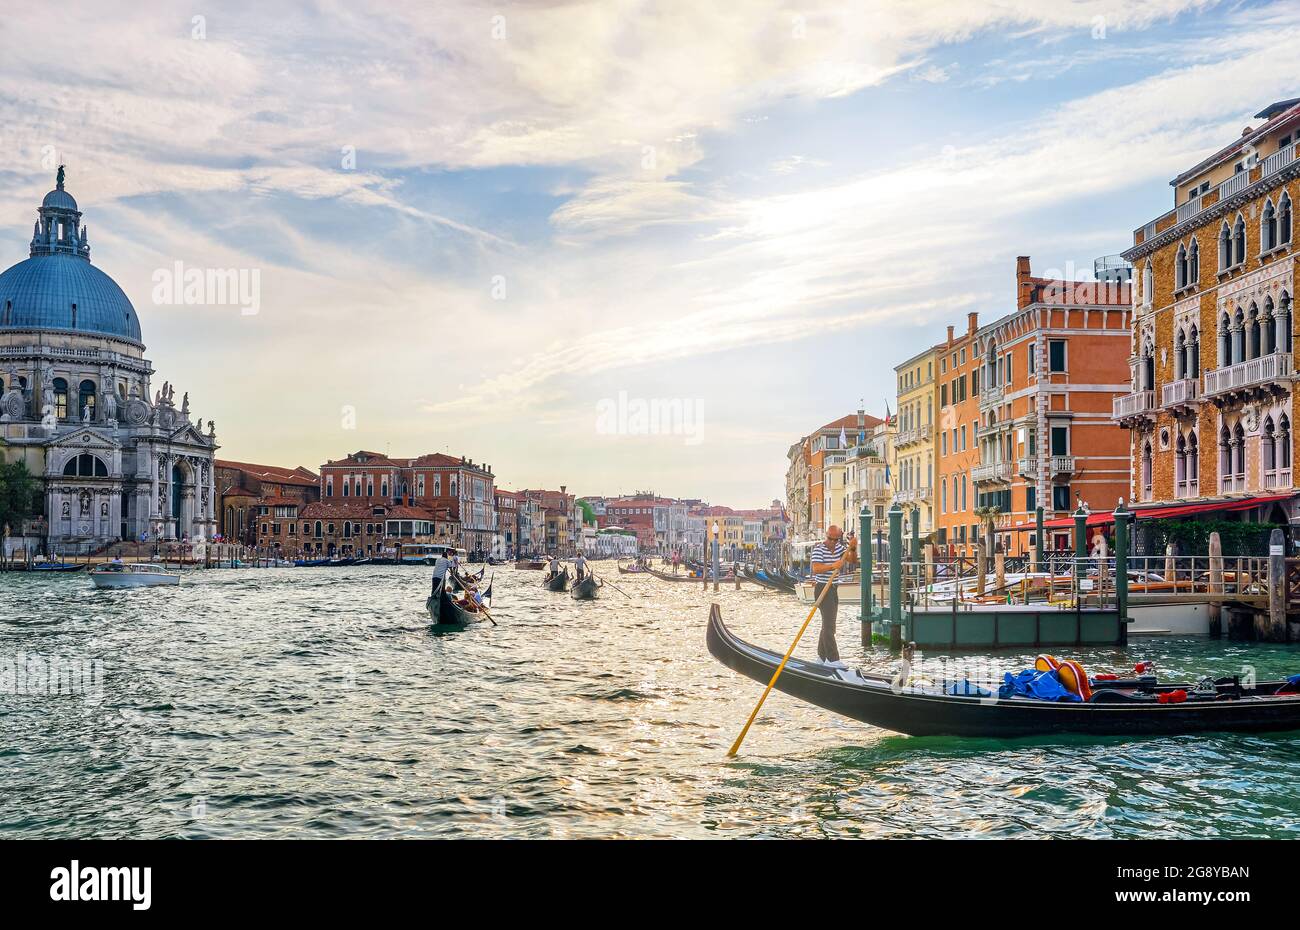 Romantic view of Grand Canal, Venice, Italy. Basilica di Santa Maria della Salute or St Mary of Health, colorful palaces by waterfront, many gondolas Stock Photo